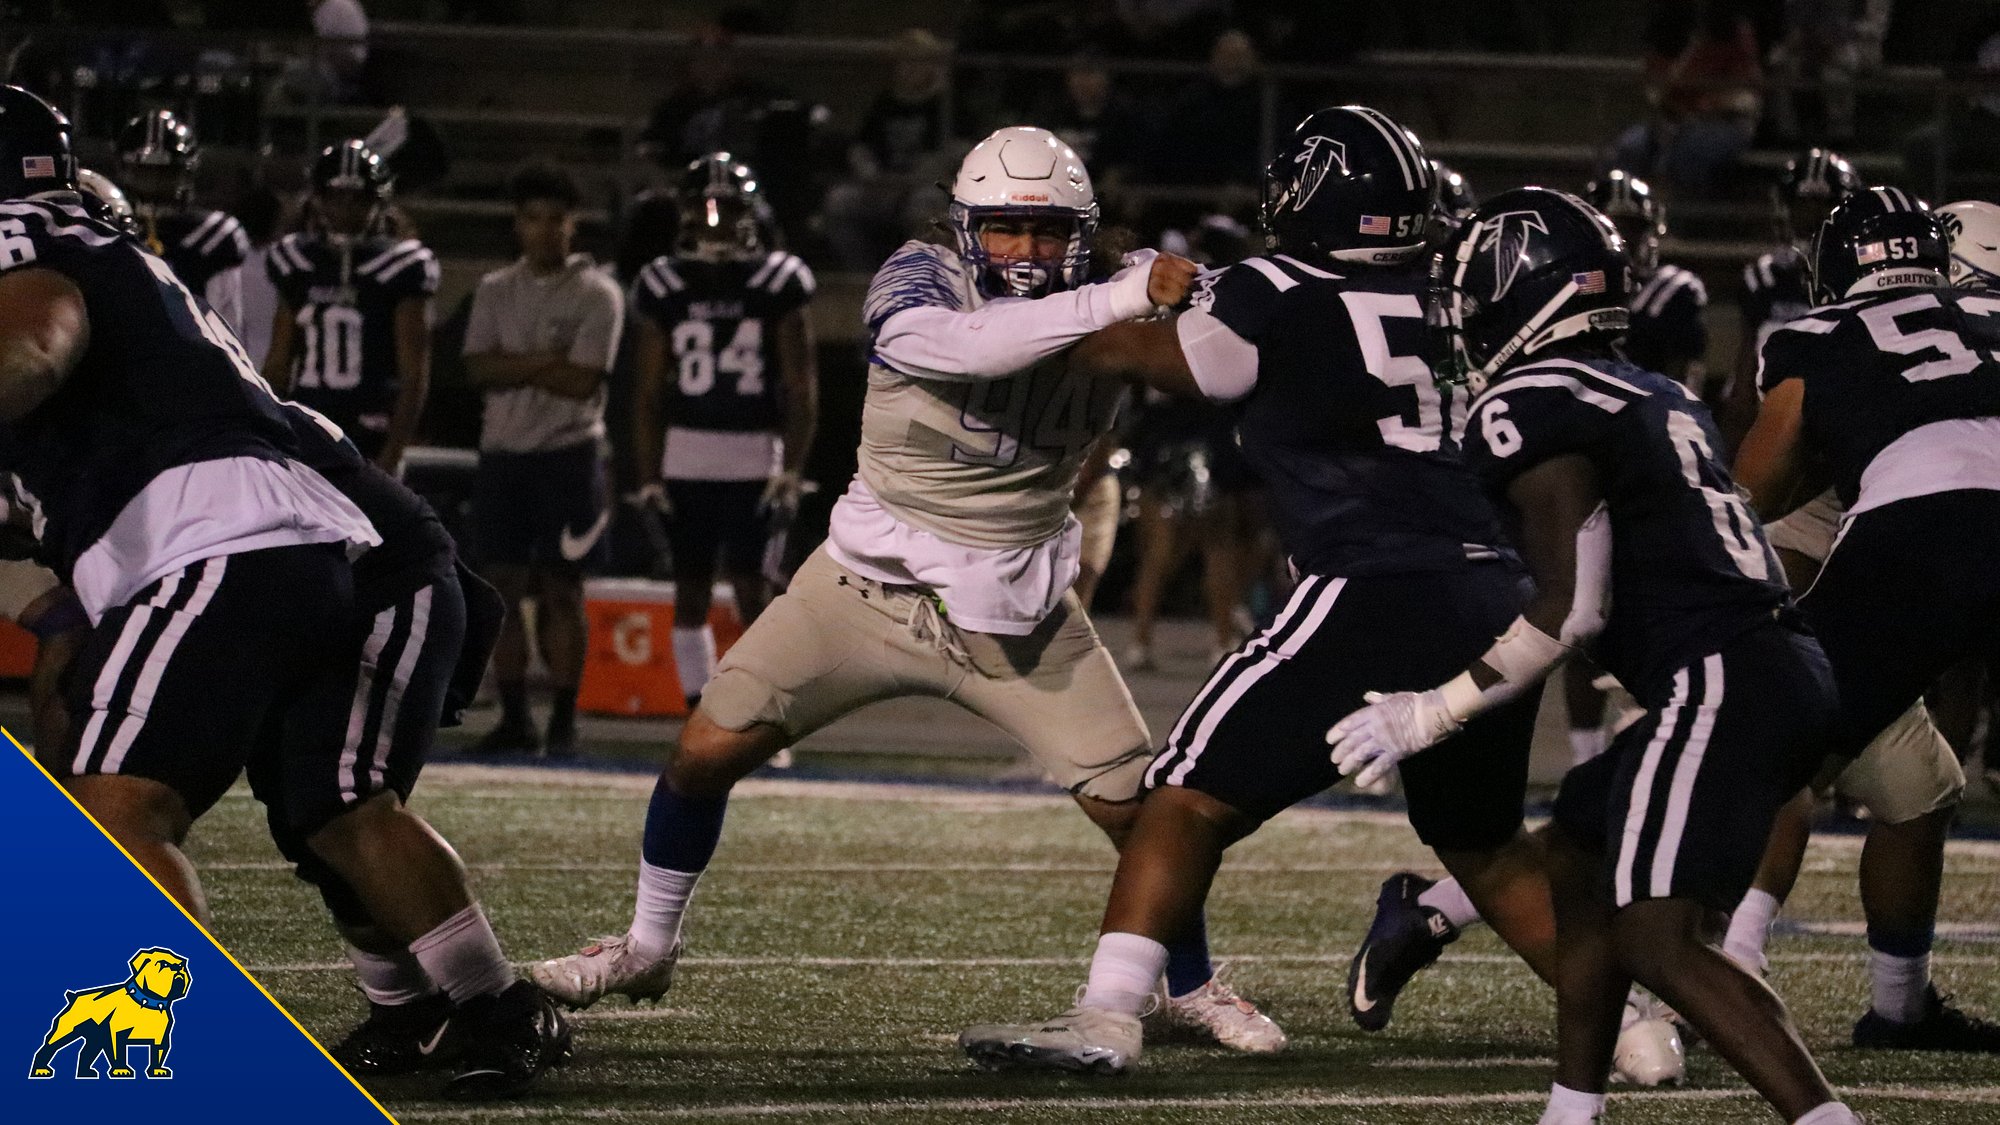 No. 16 Bulldogs Edged by No. 7 Cerritos after Late Touchdown